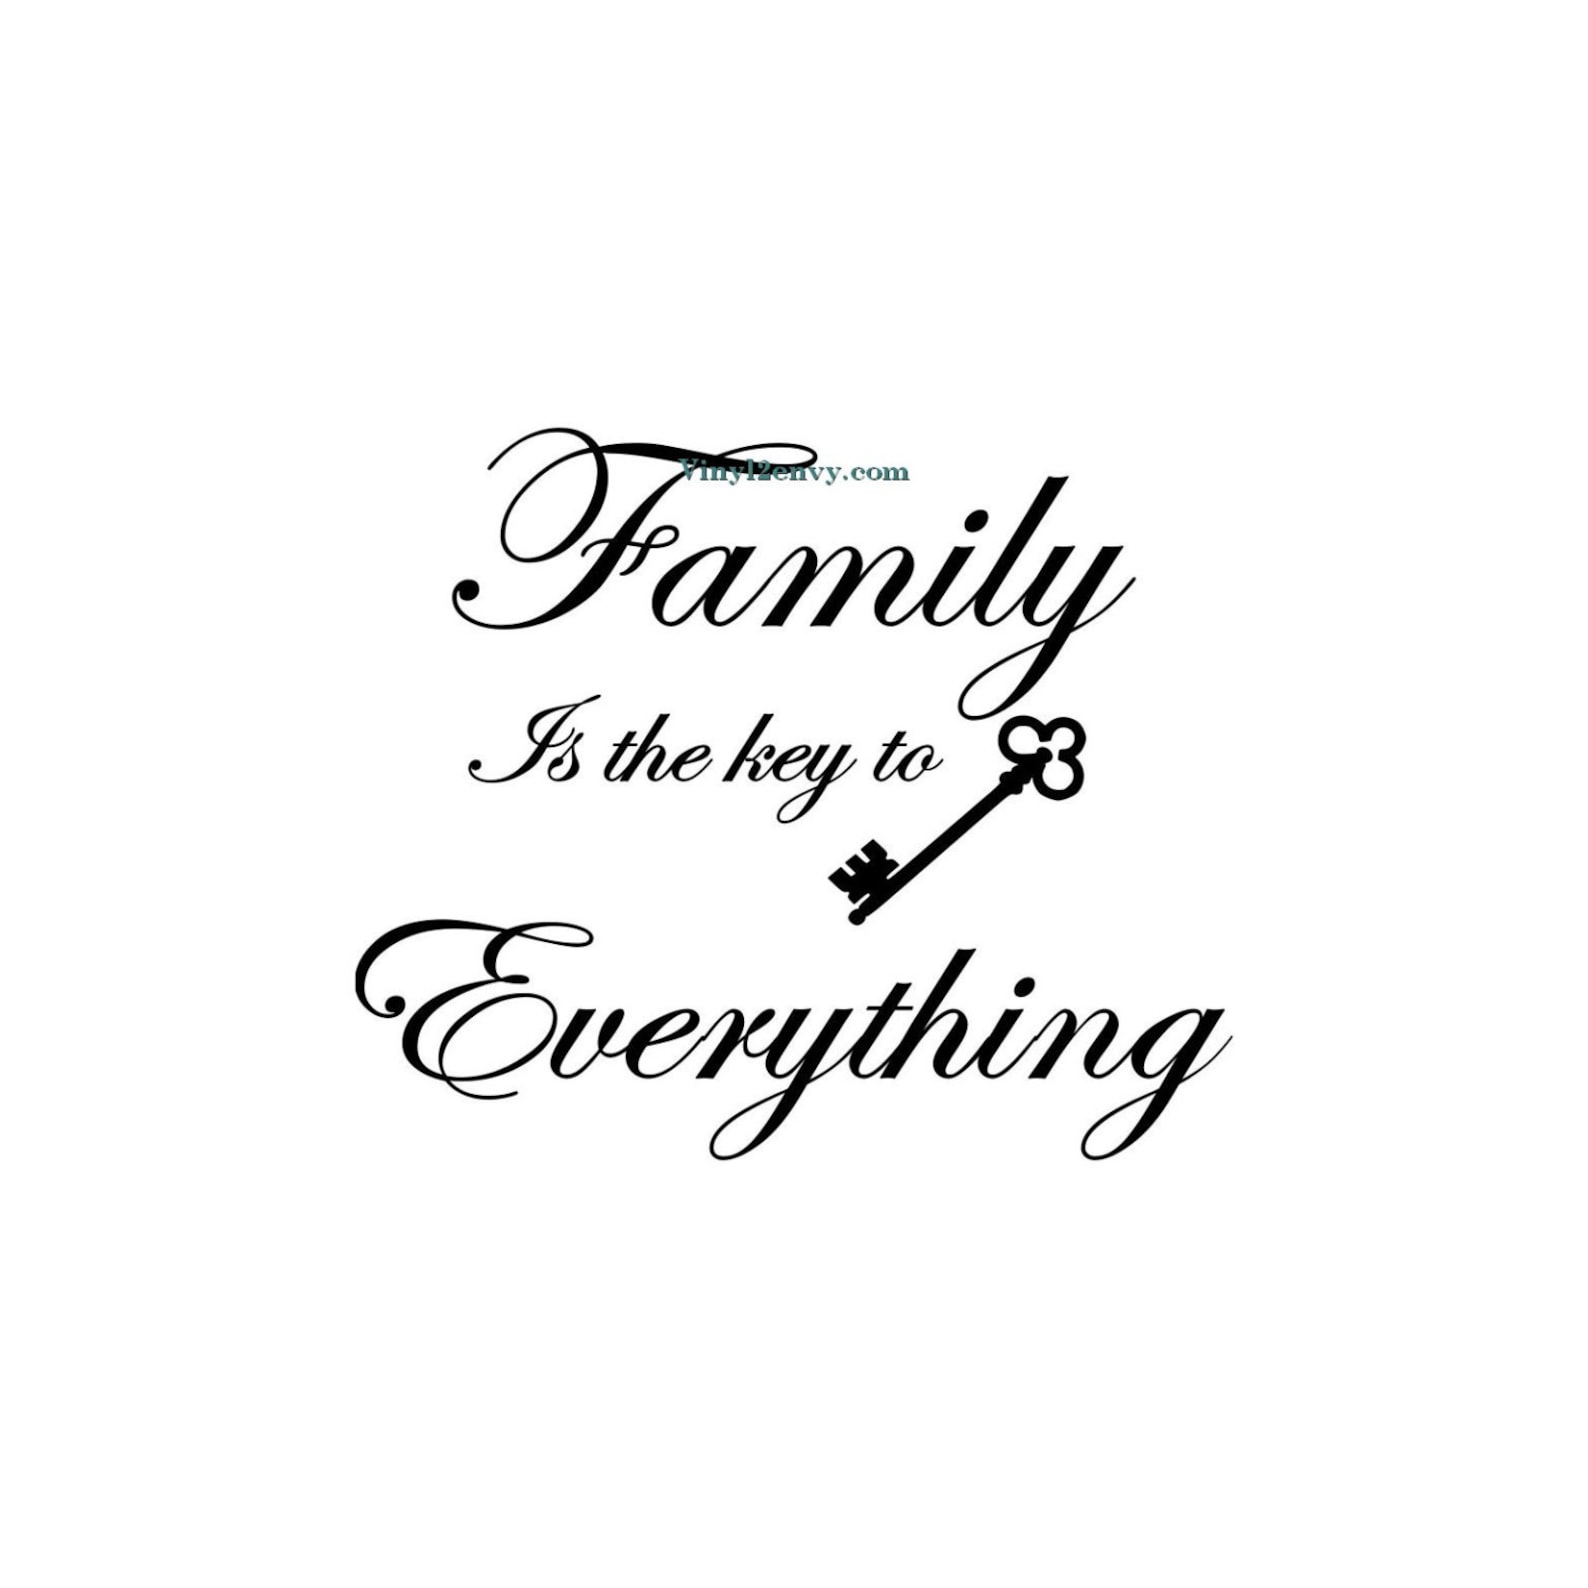 My Family is my everything тату. Family is my Life. My Family is my Life. My Family, everything тату. Family is everything